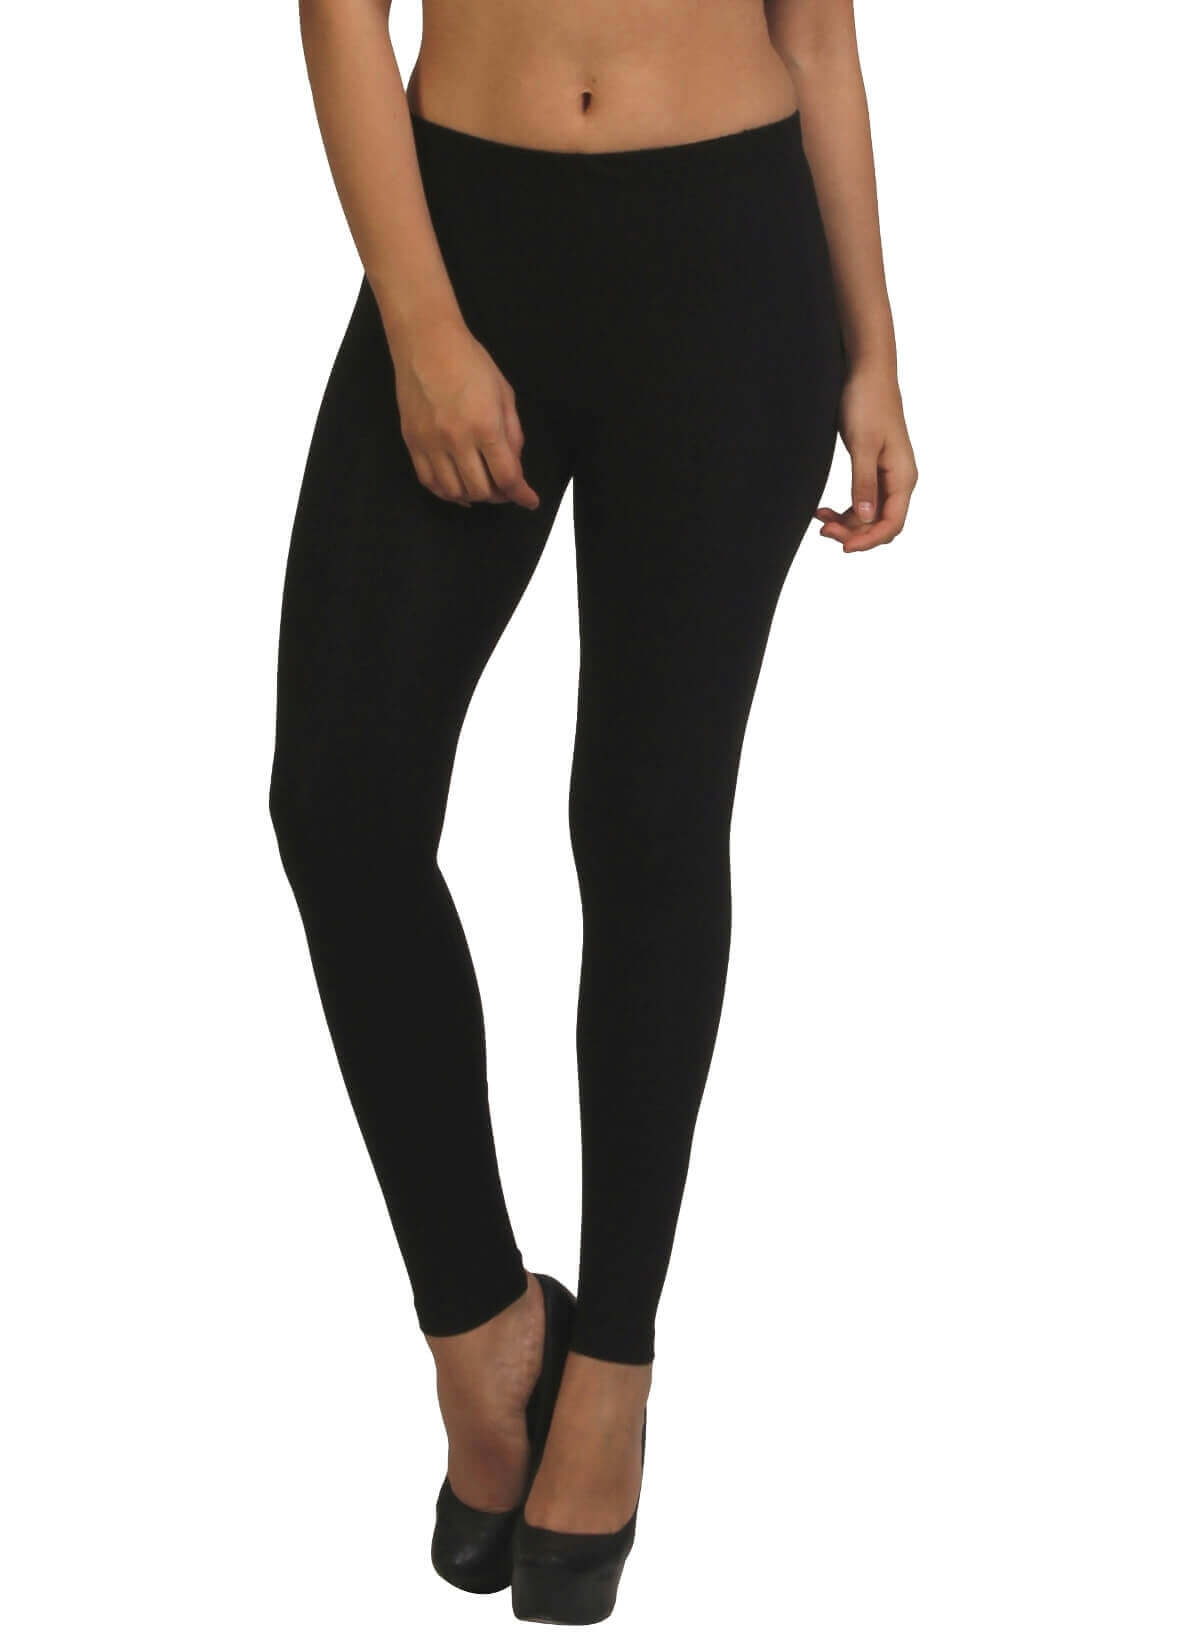 Buy Tights For Women, Tights For Women Online India - SEEQ